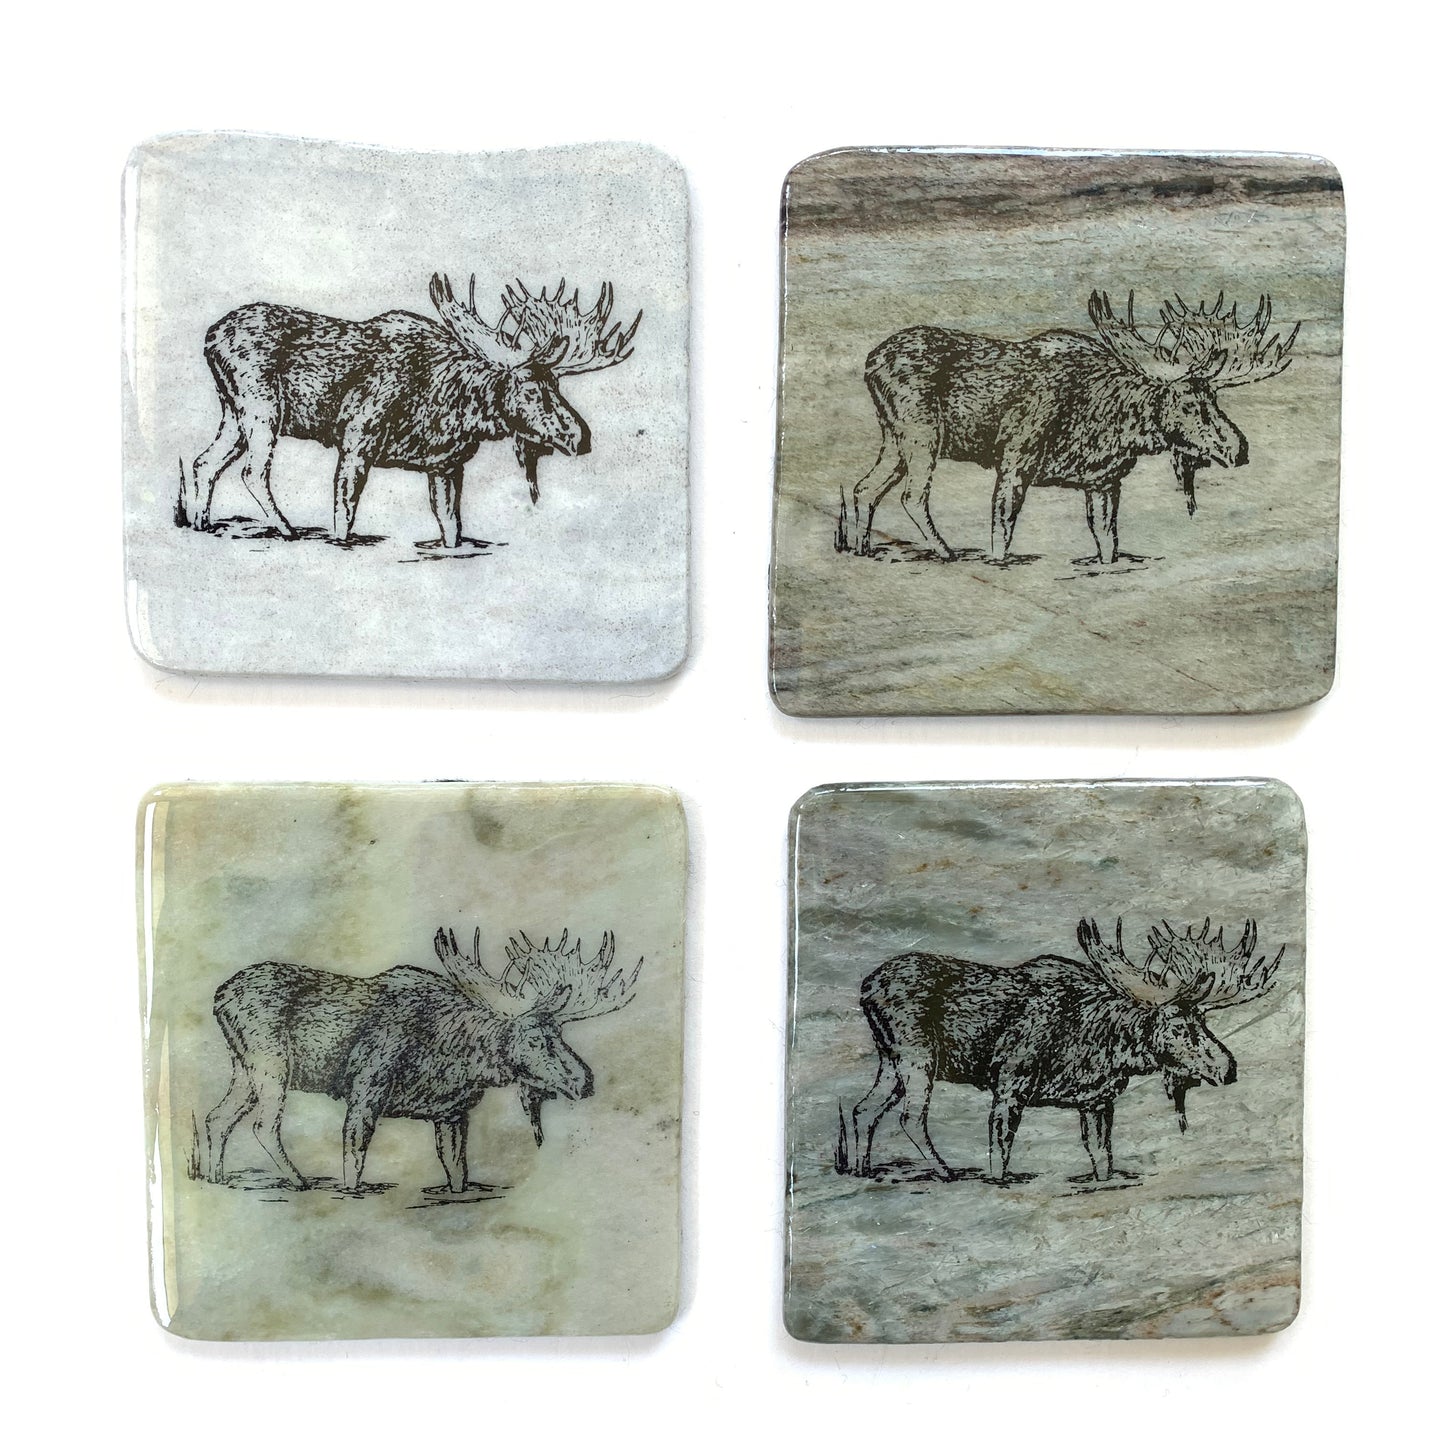 Various granite coasters with moose design made in Canada.